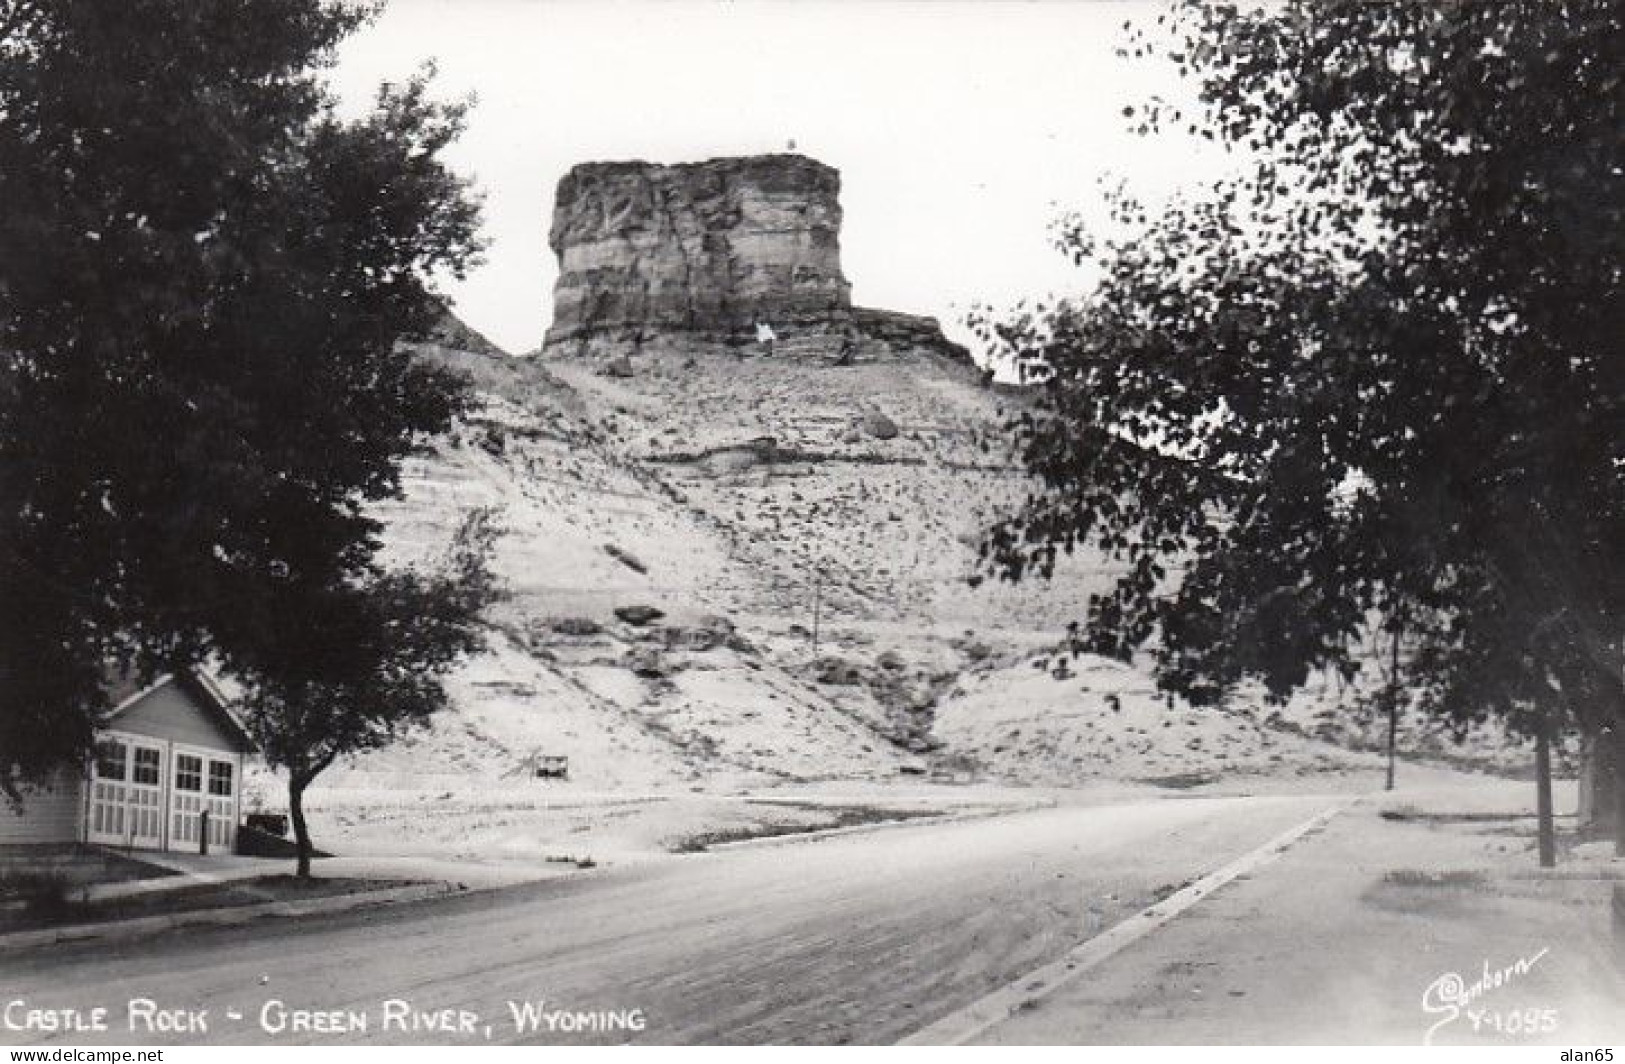 Green River Wyoming, Scenic Roadside View Of Castle Rock, C1940s/50s Vintage Real Photo Postcard - Green River